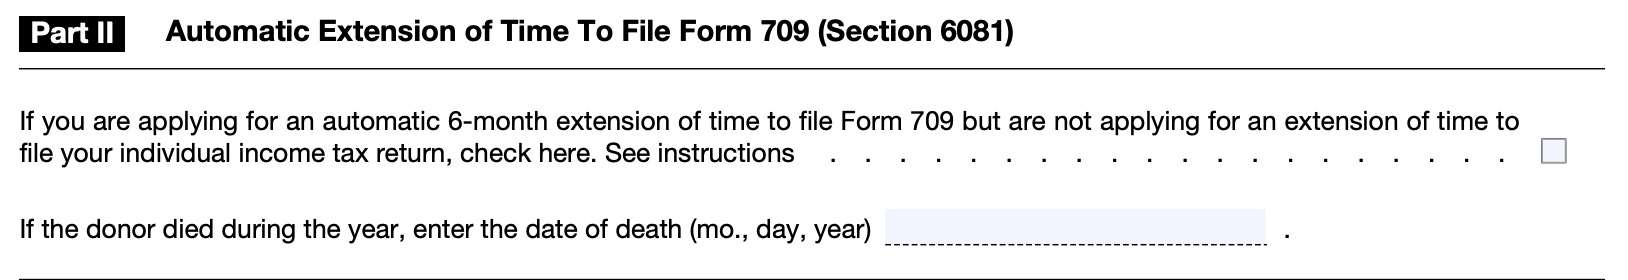 Part ii: automatic extension of time to file form 709 (Section 6081)